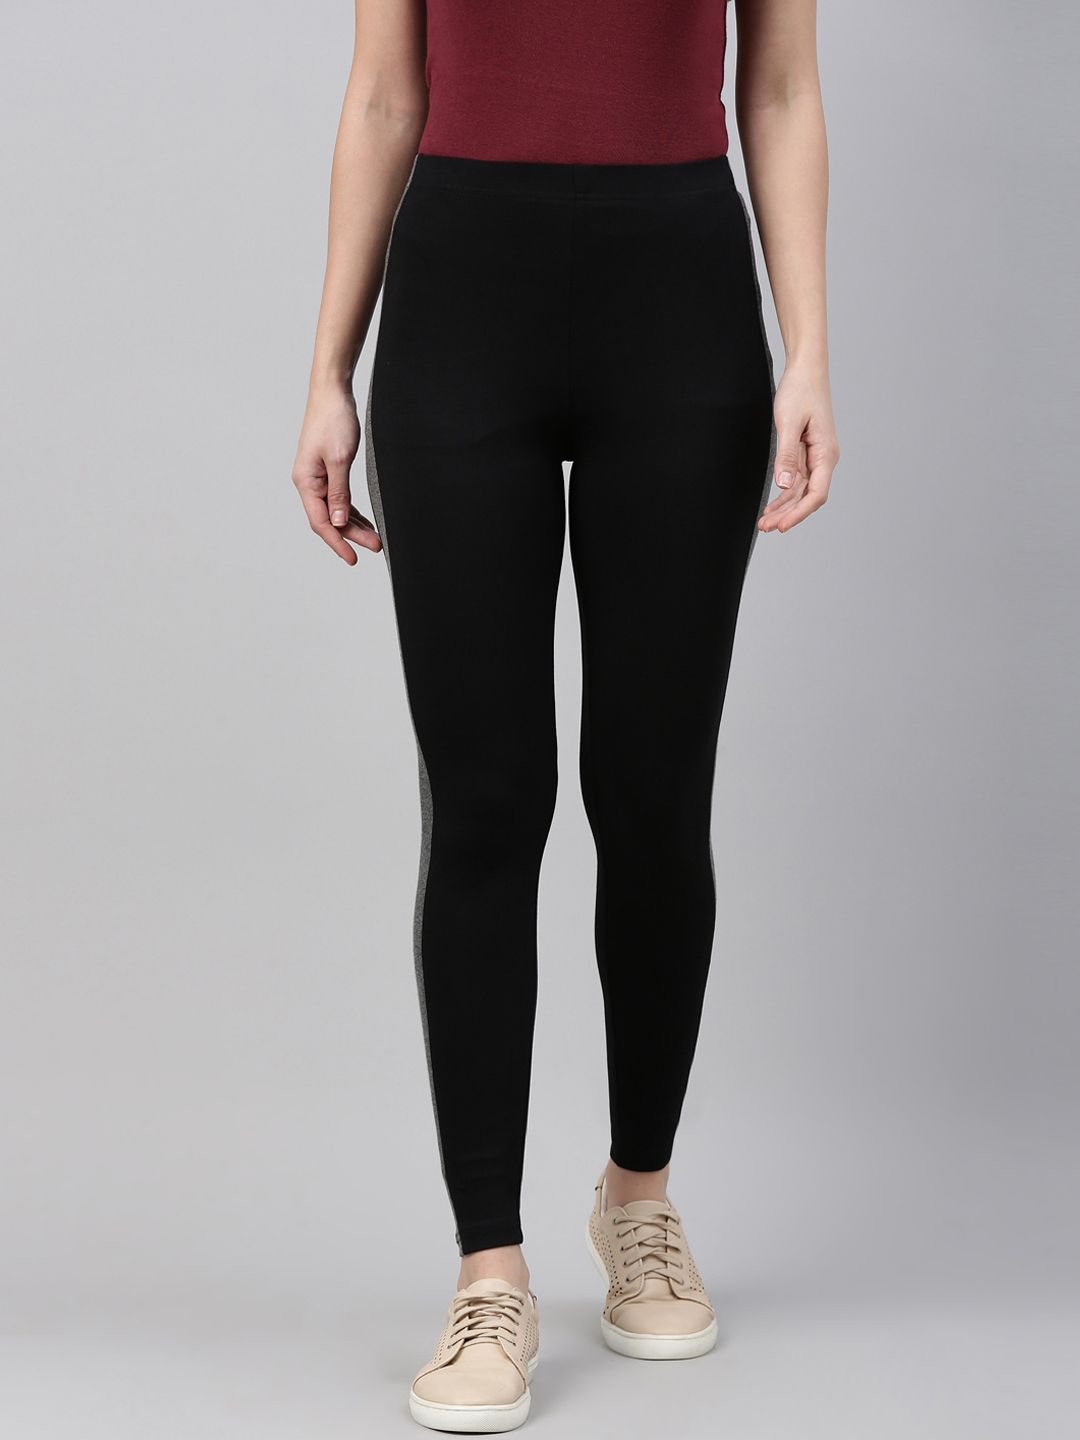 Go Colors Women Black Athleisure Ankle Length Leggings Price in India